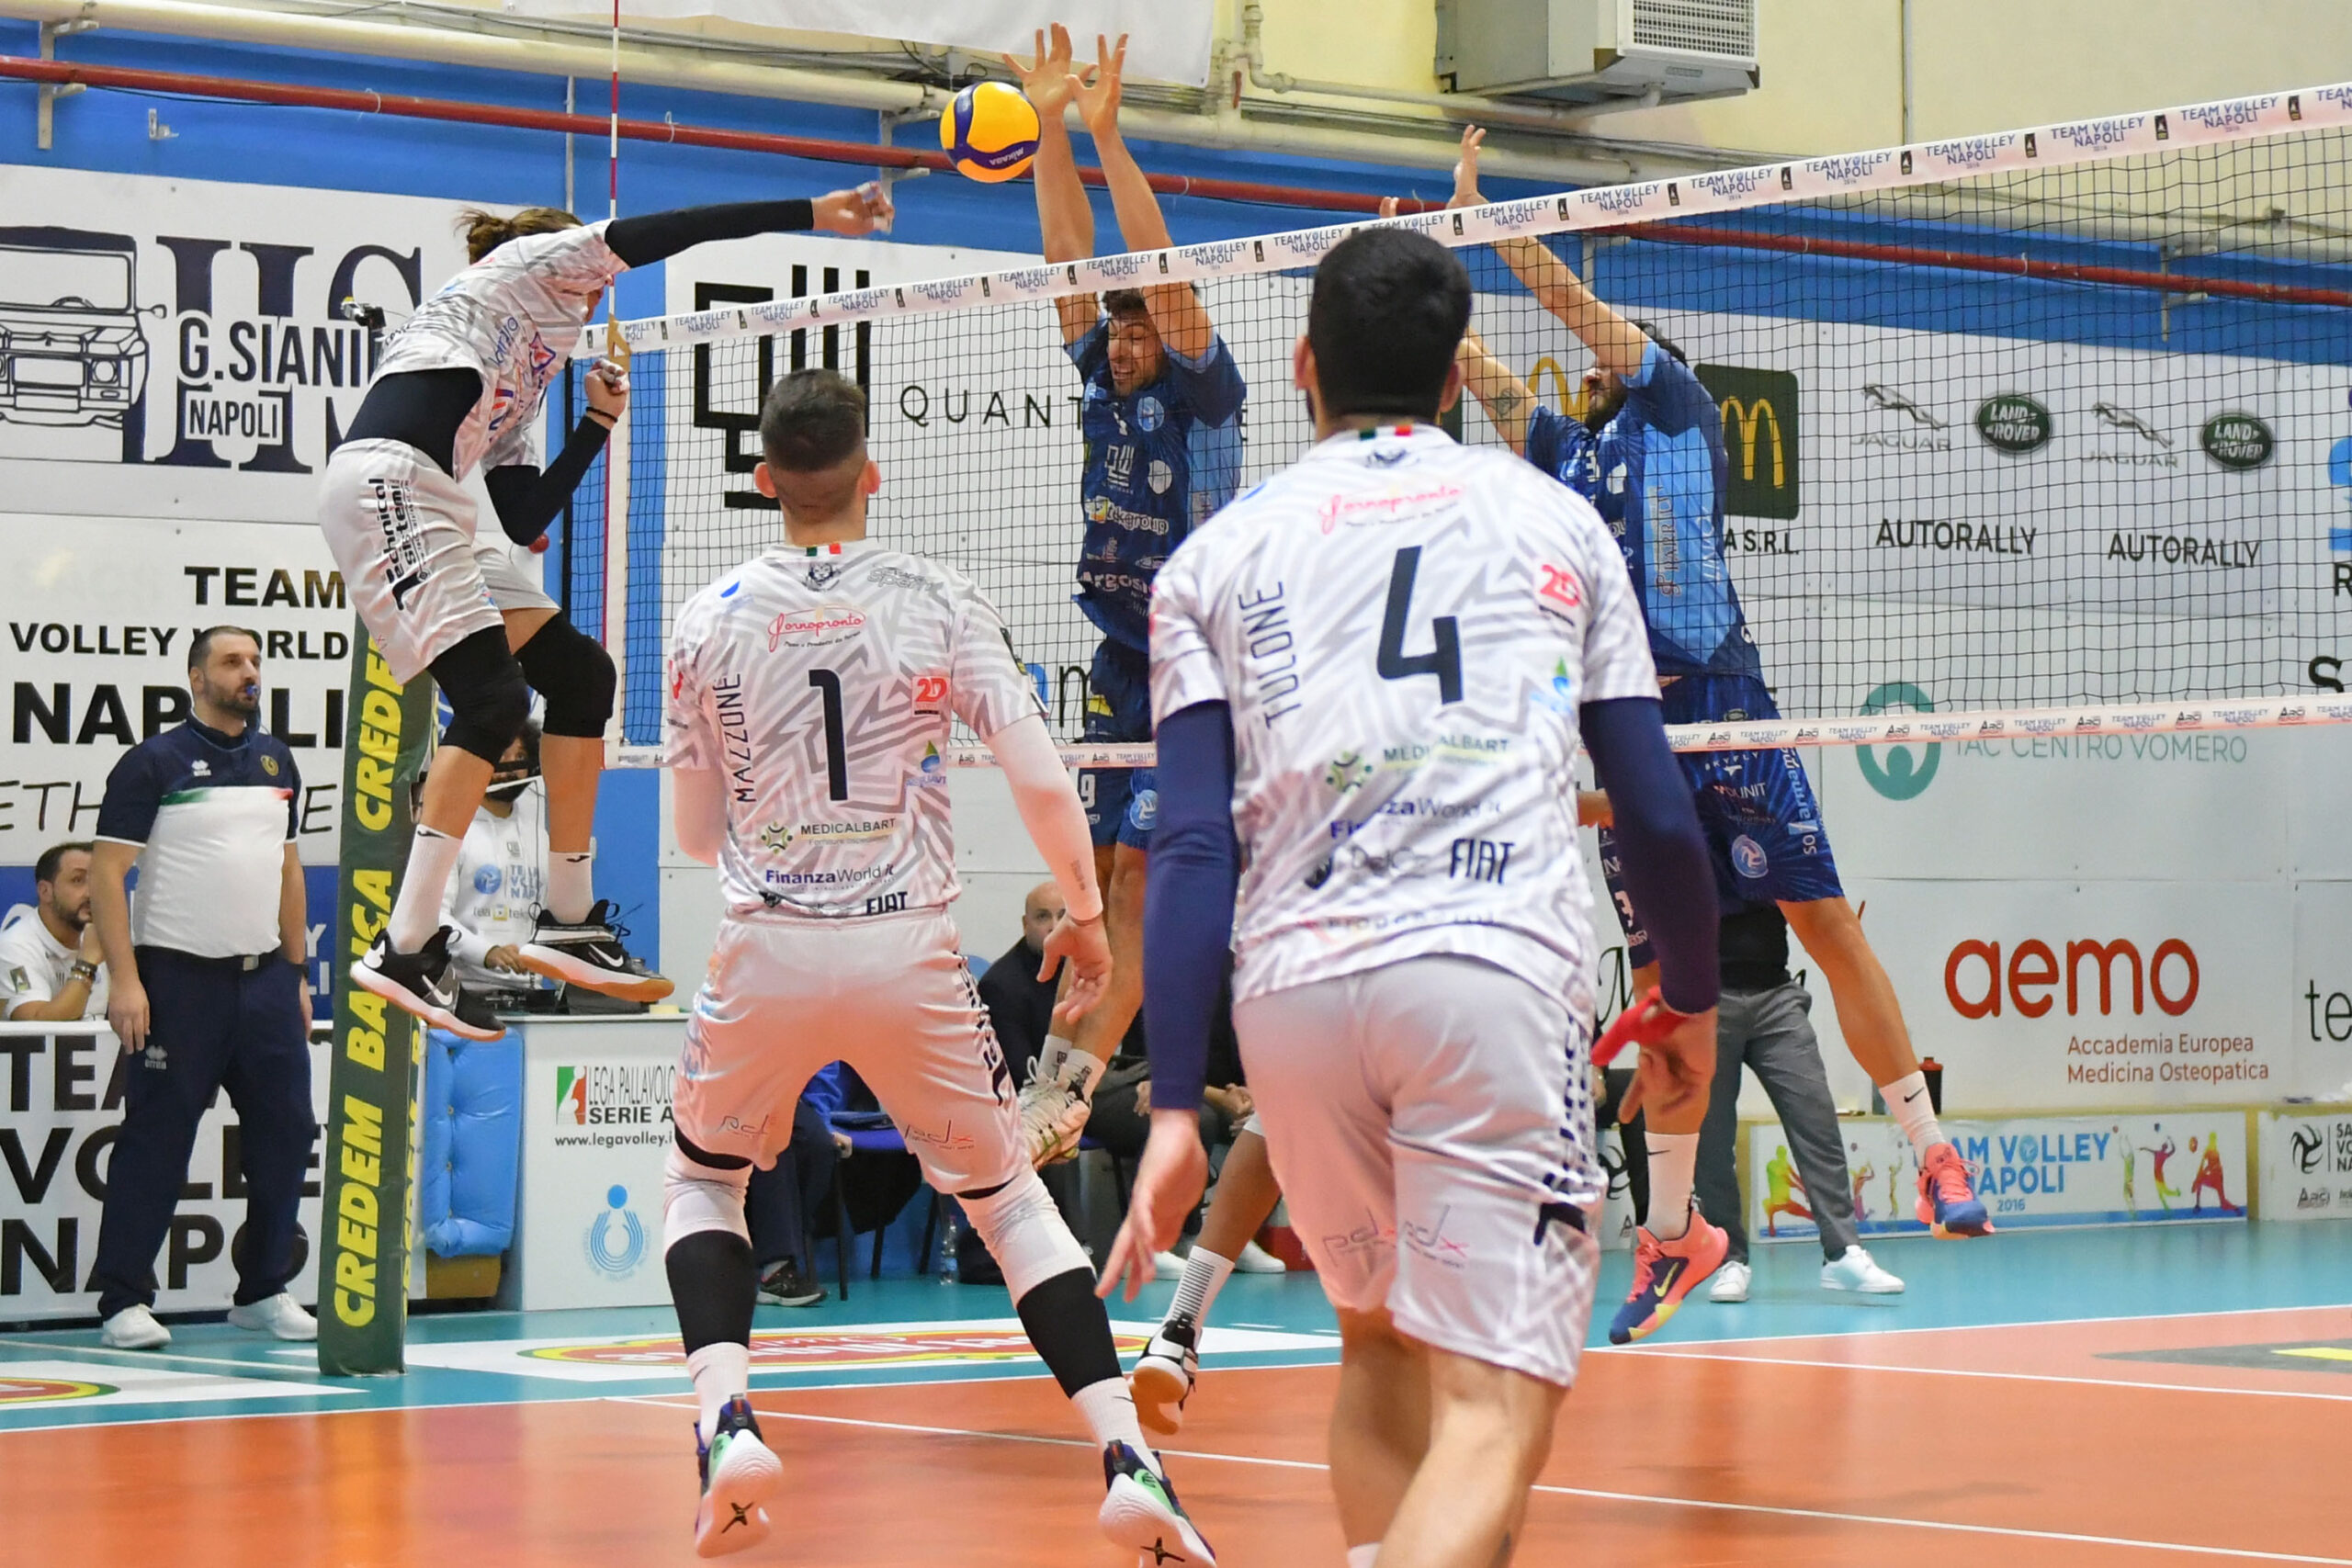 https://www.teamvolleynapoli.it/wp-content/uploads/2023/06/Napoli-Lecce_184-scaled.jpg